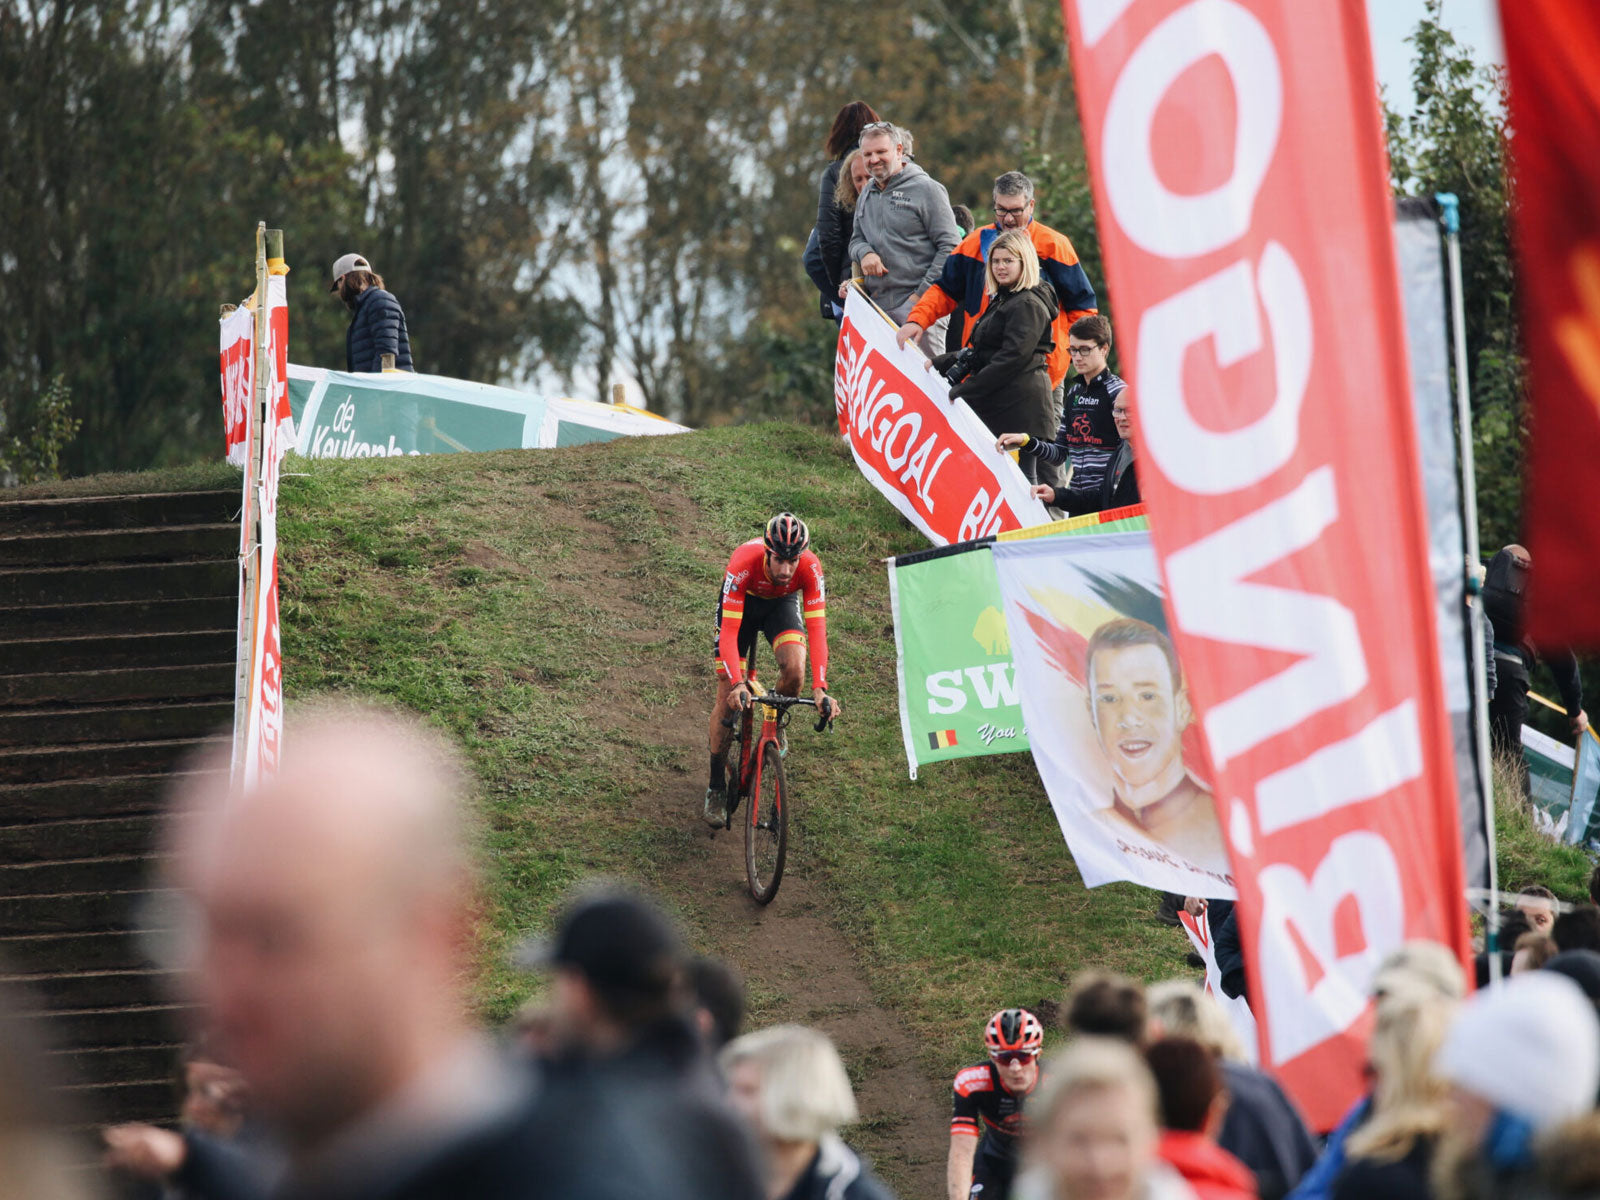 ORTS GETS A HUGE START ON THE CX SEASON